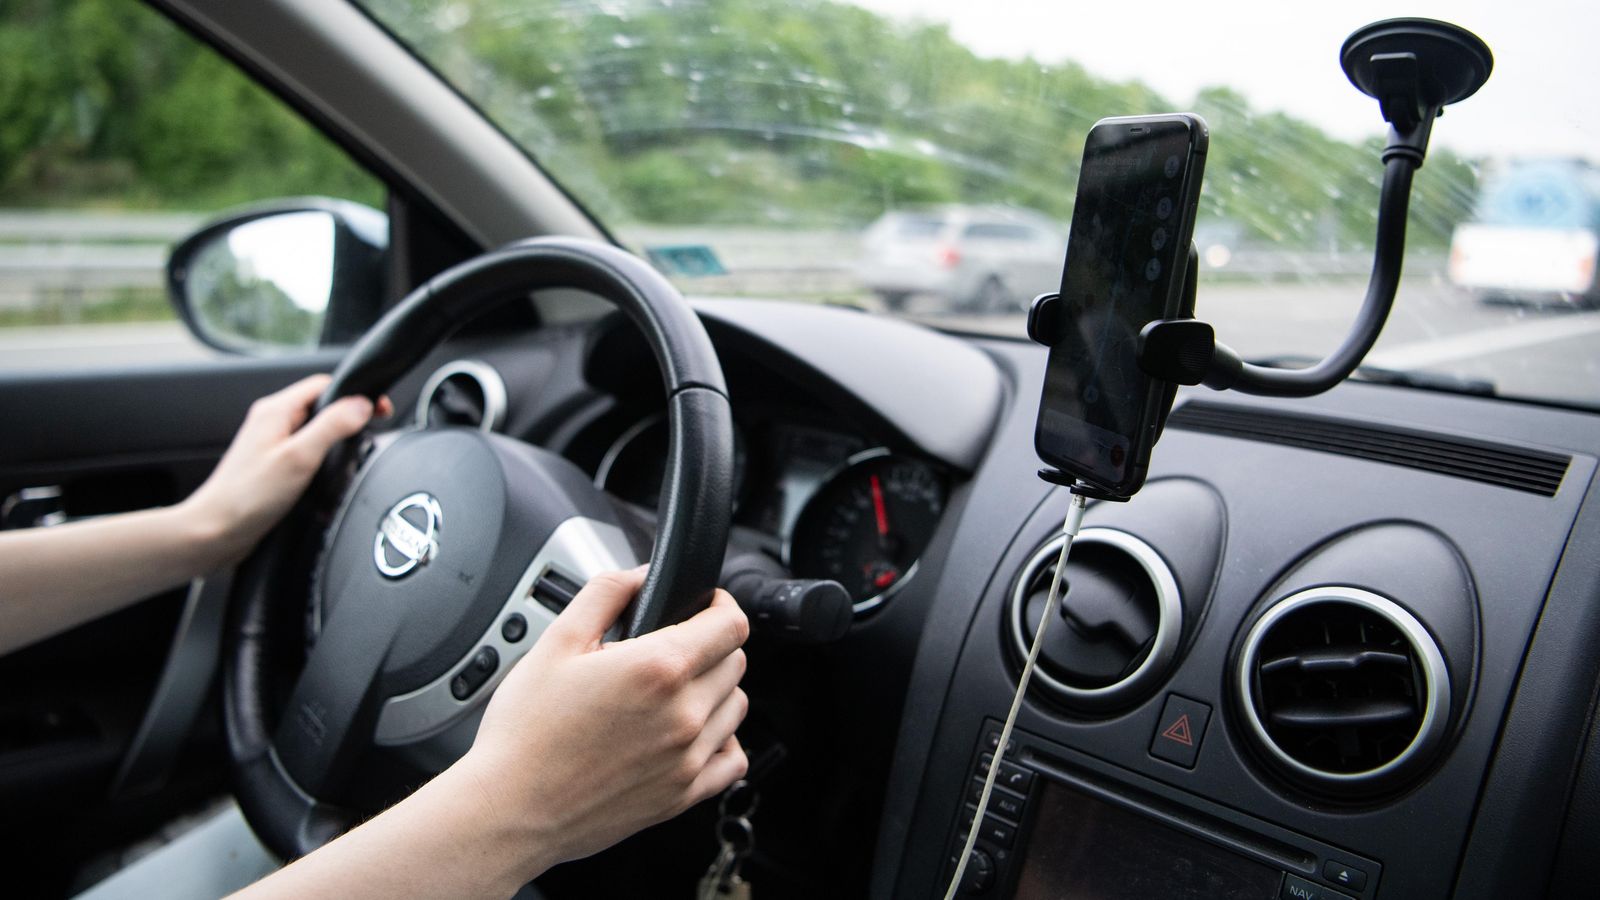 Michigan's new handsfree driving law goes into effect June 30 Axios